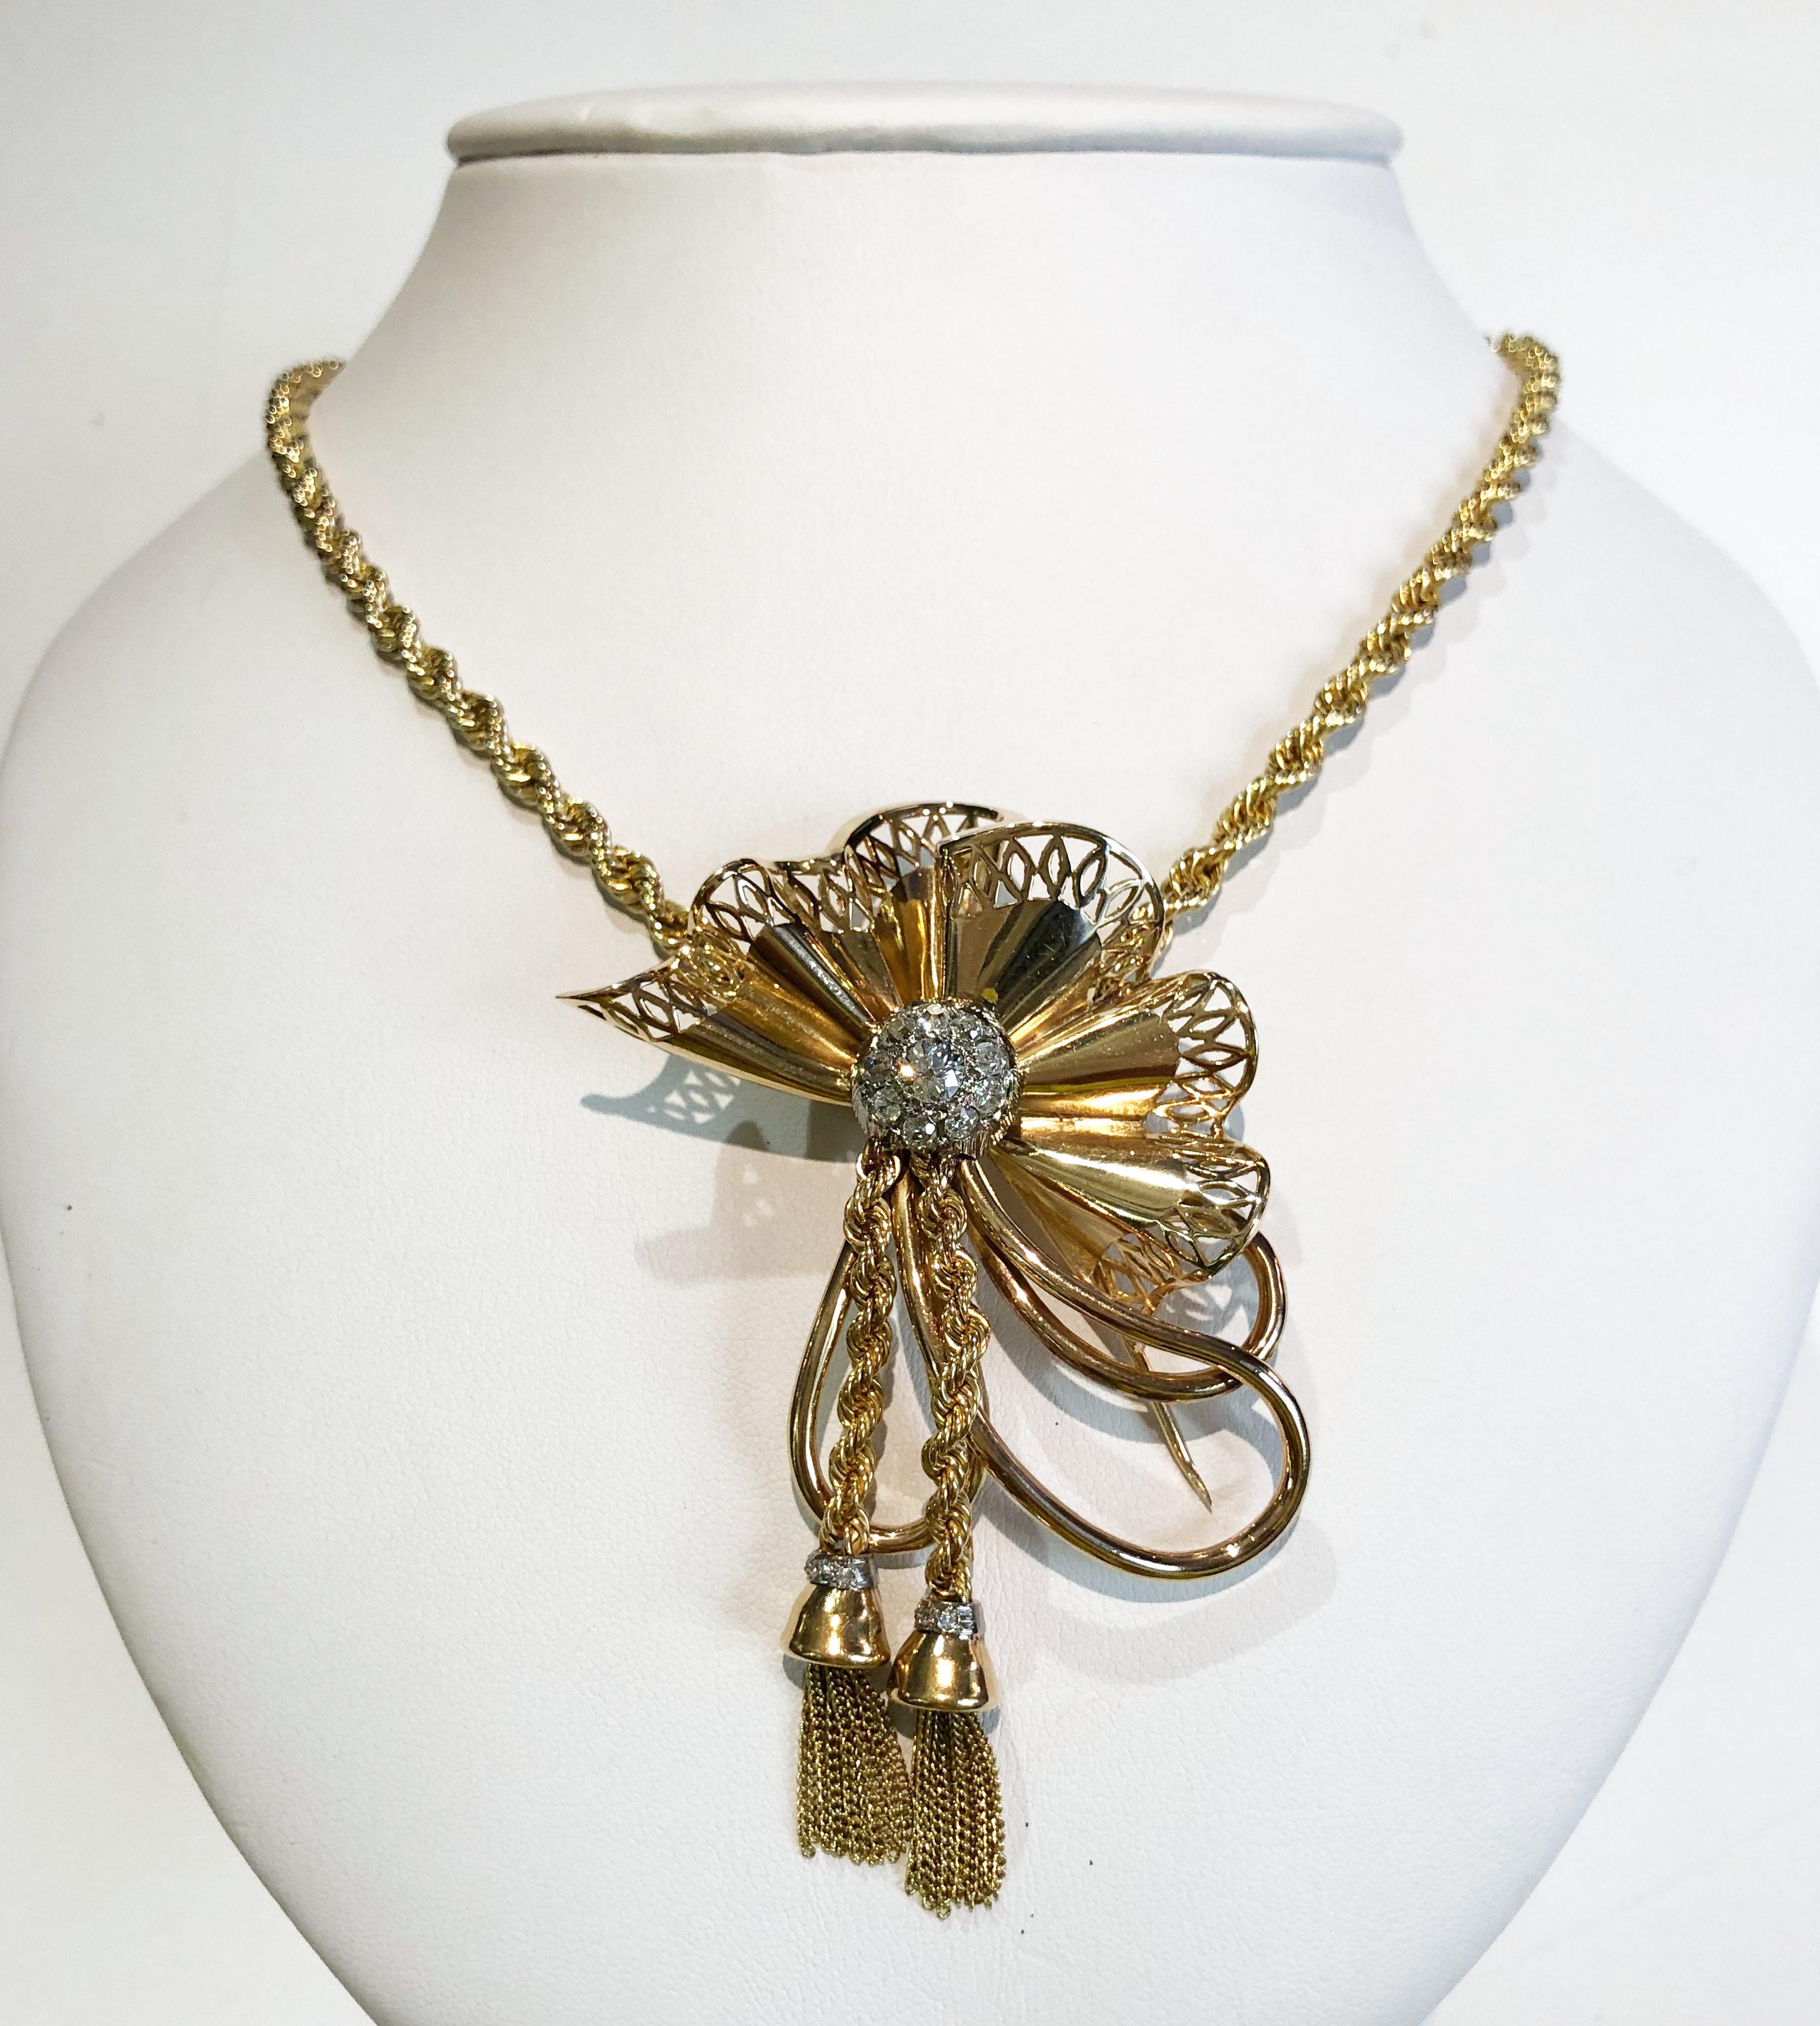 Vintage 18 karat yellow gold necklace, with a gold bow and brilliant diamonds in the center and also on the fringes, Italy 1940s
Length 50 cm
Pair of matching earrings is available